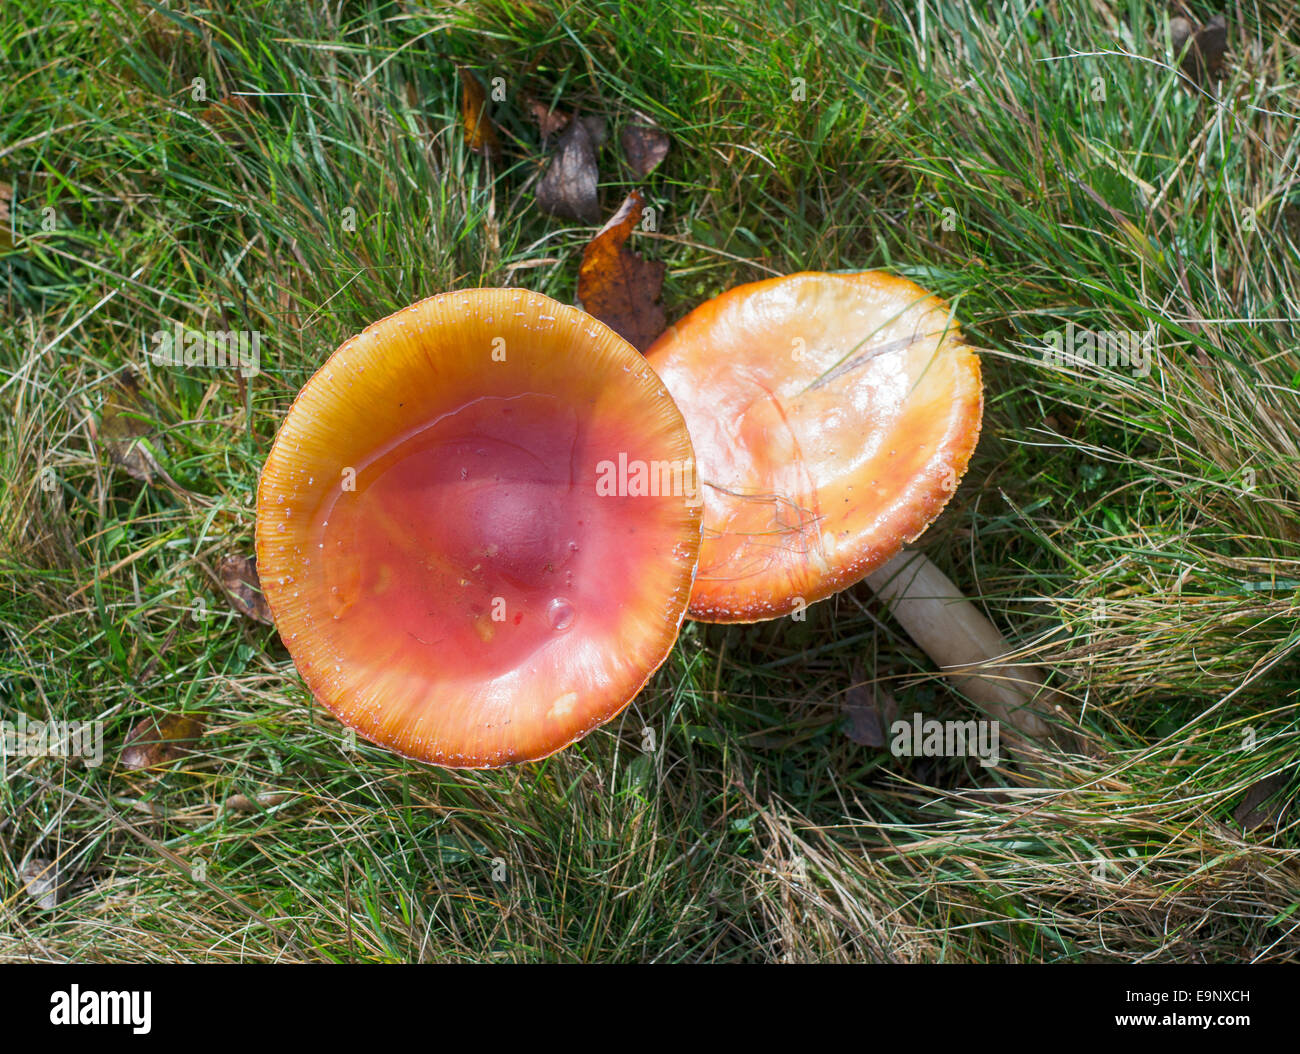 Mushrooms-seen-growing-near-the-path-For